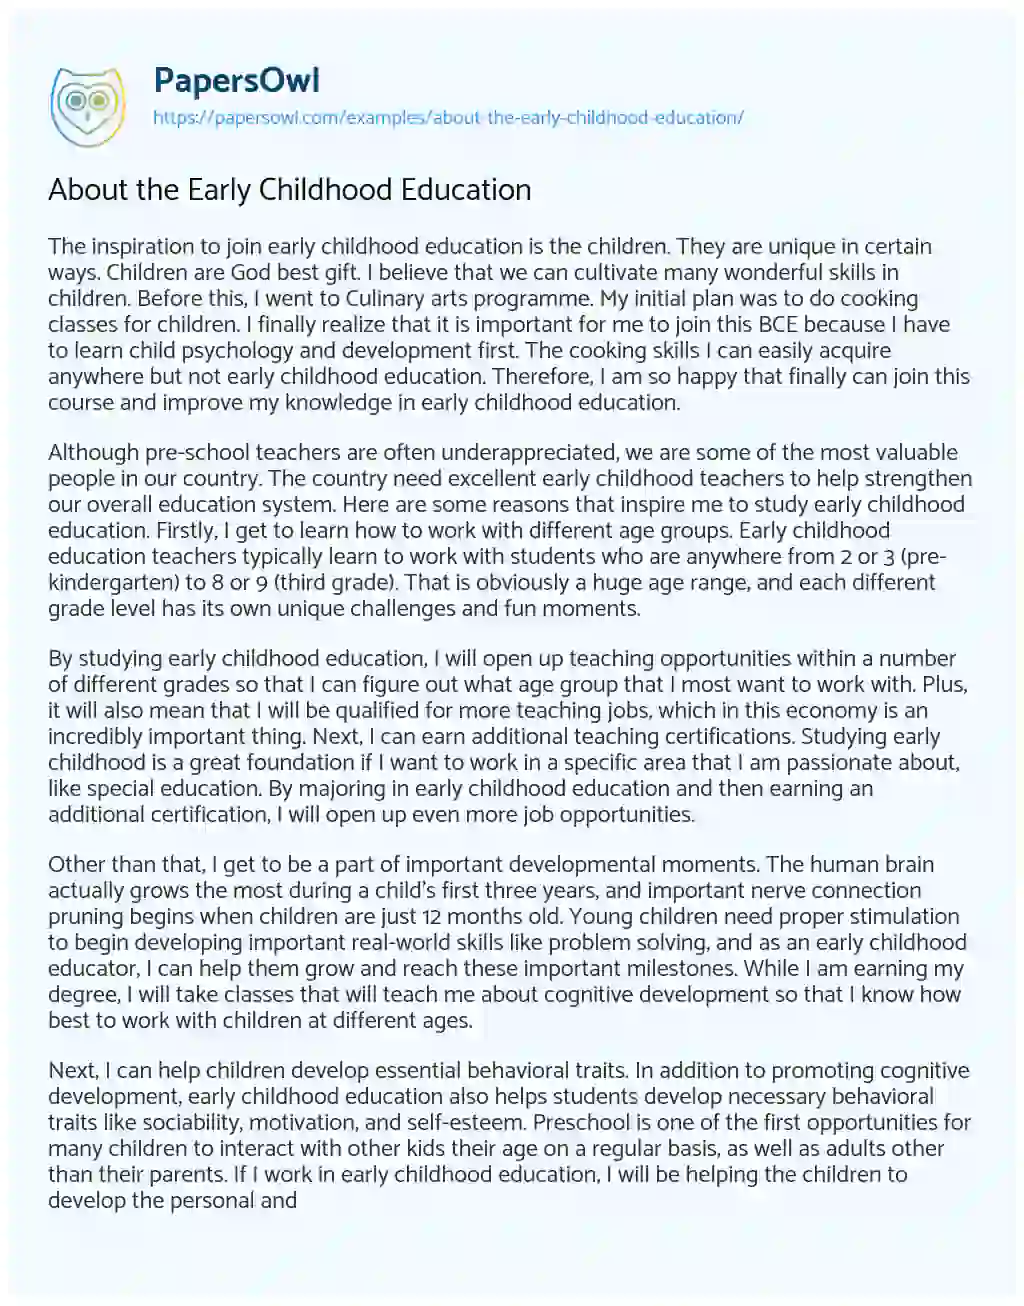 About the Early Childhood Education essay